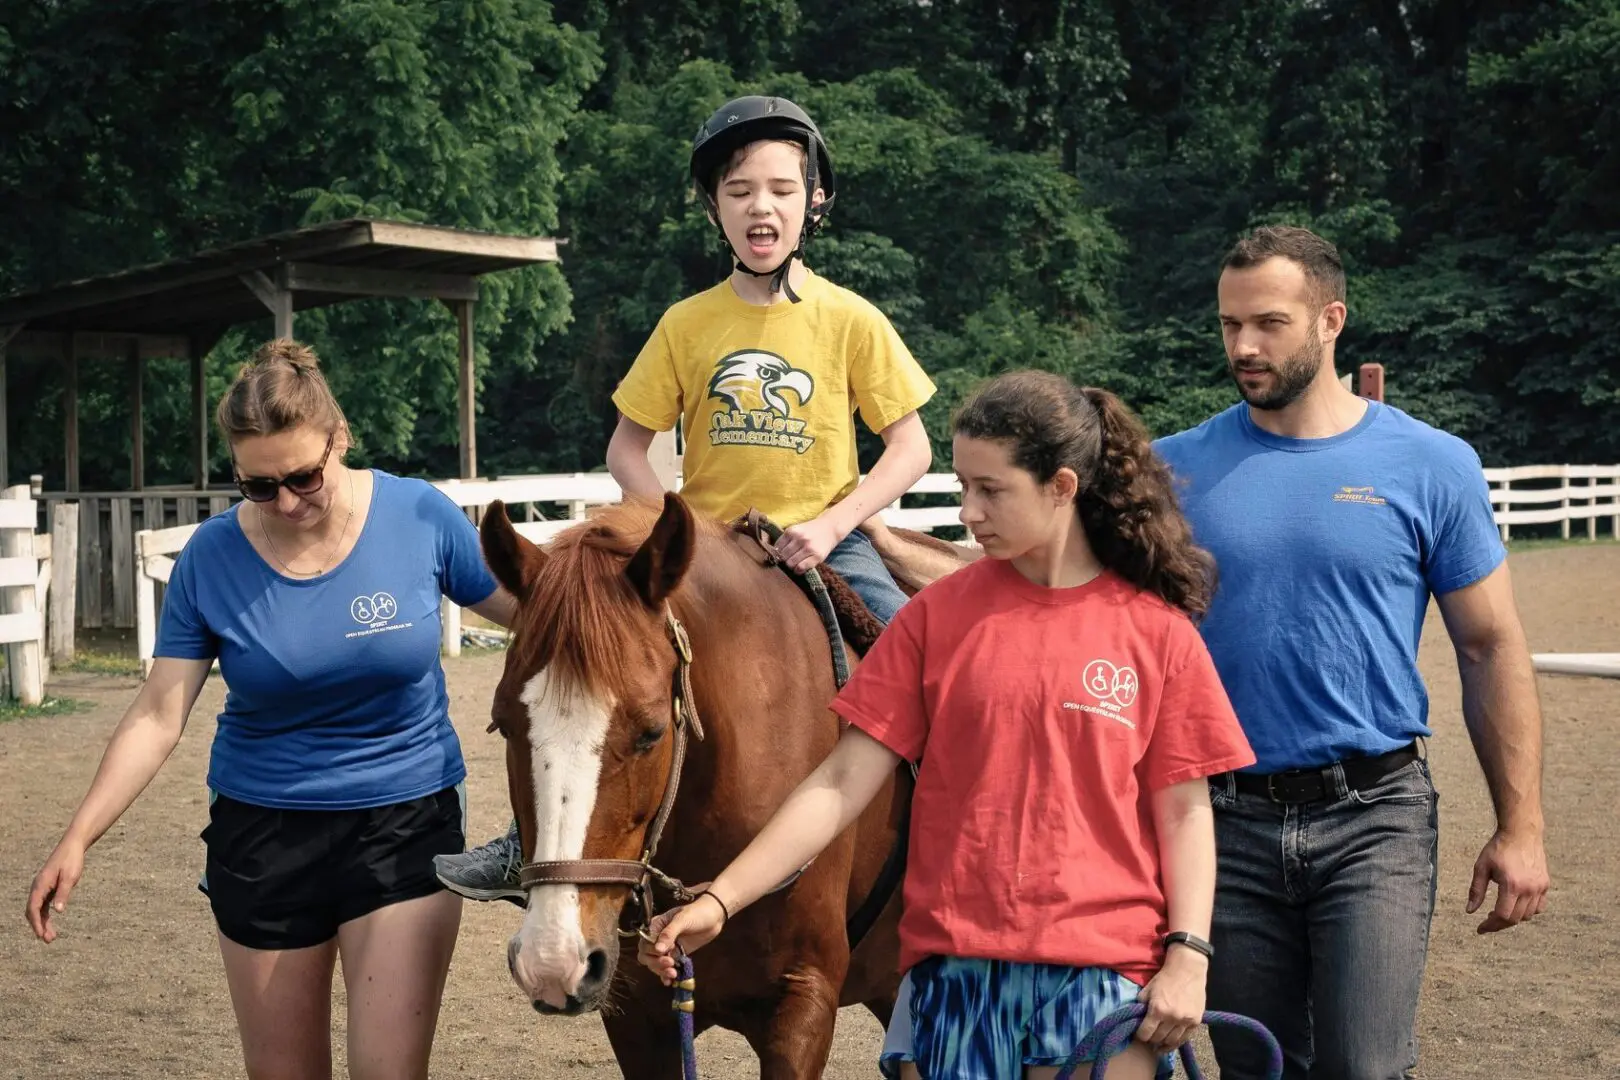 Two children, two adults, and a horse